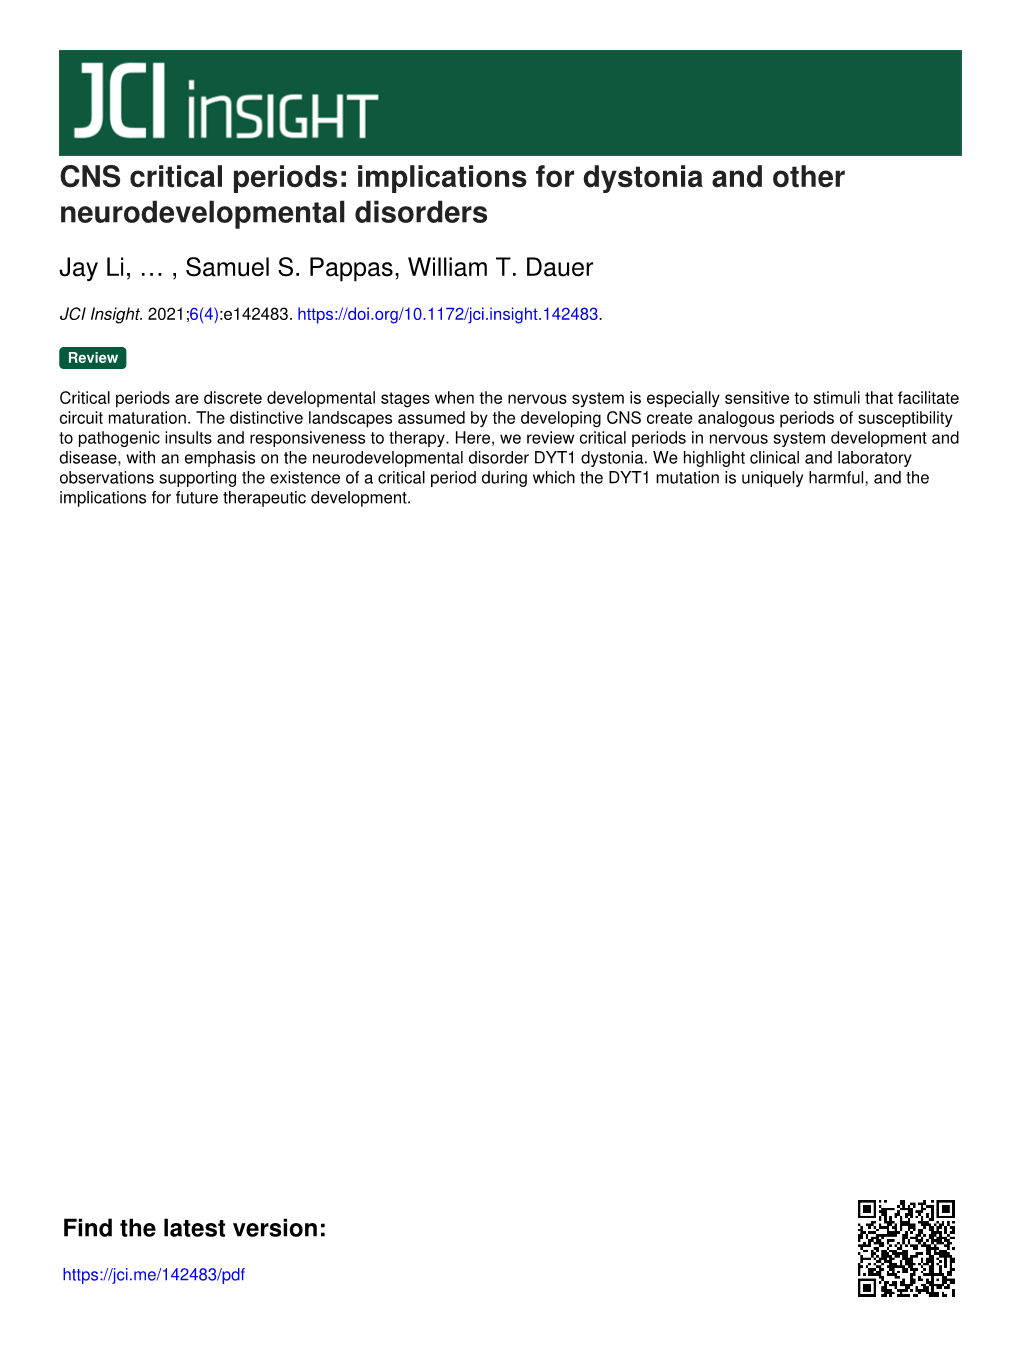 CNS Critical Periods: Implications for Dystonia and Other Neurodevelopmental Disorders